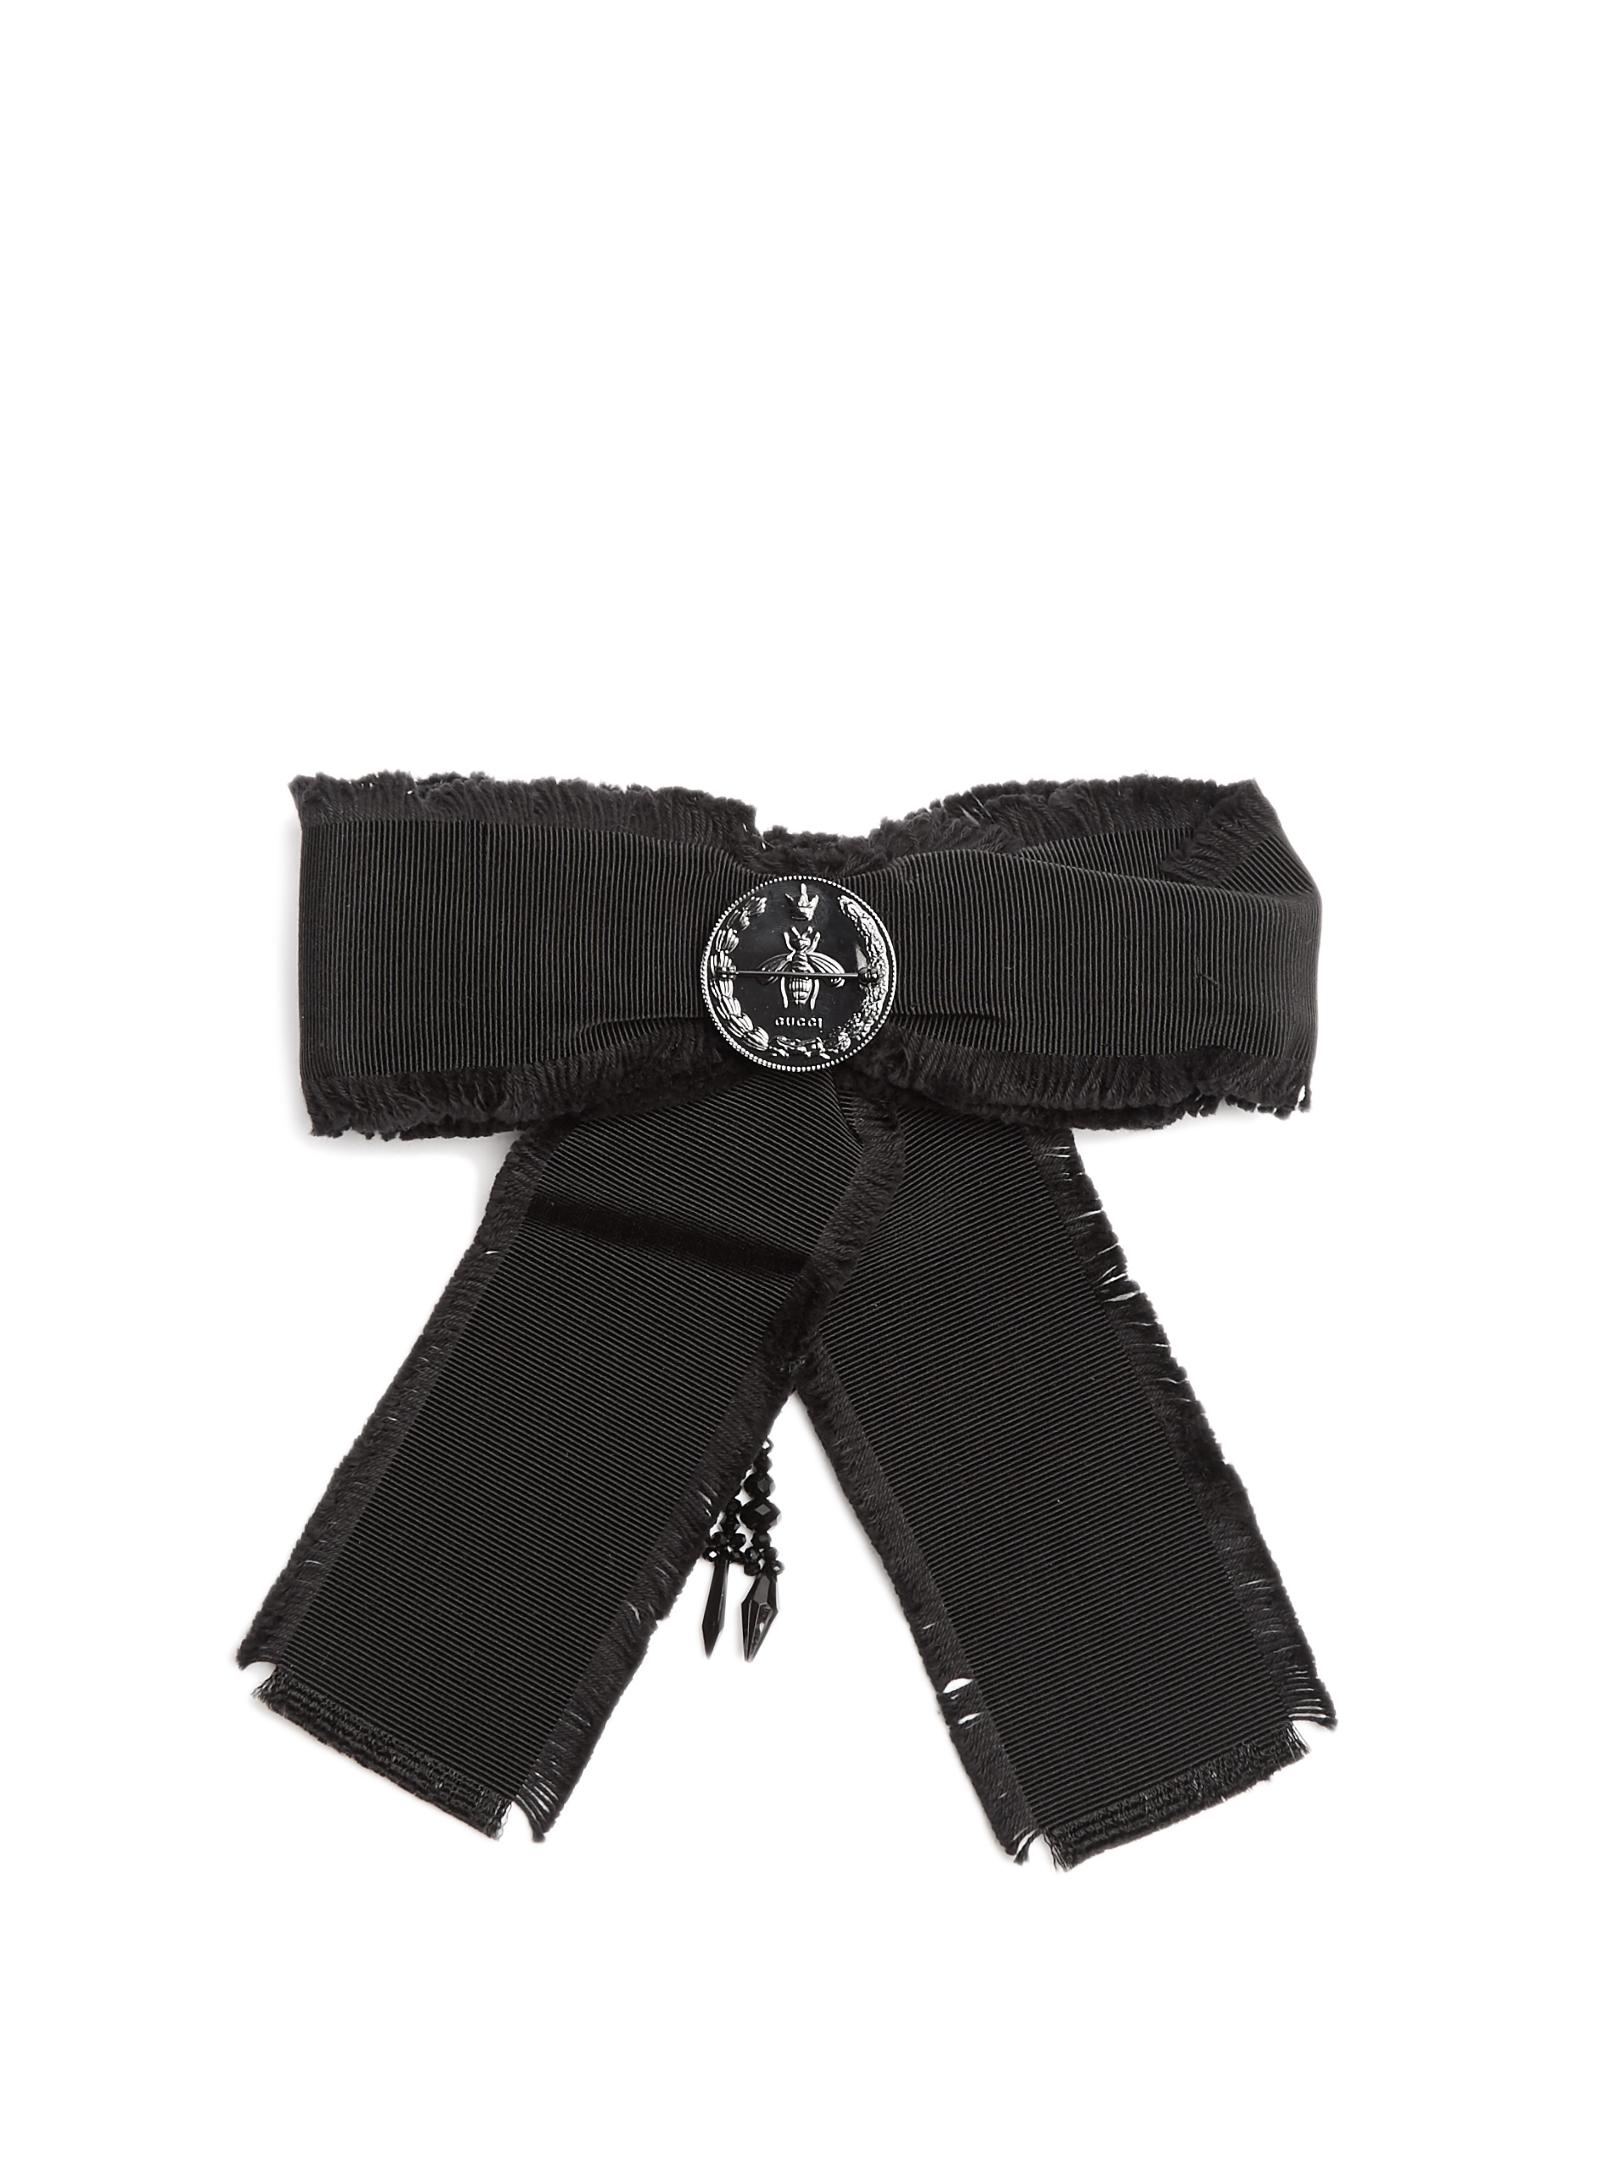 Gucci Bead-embellished Bow Brooch in Black | Lyst